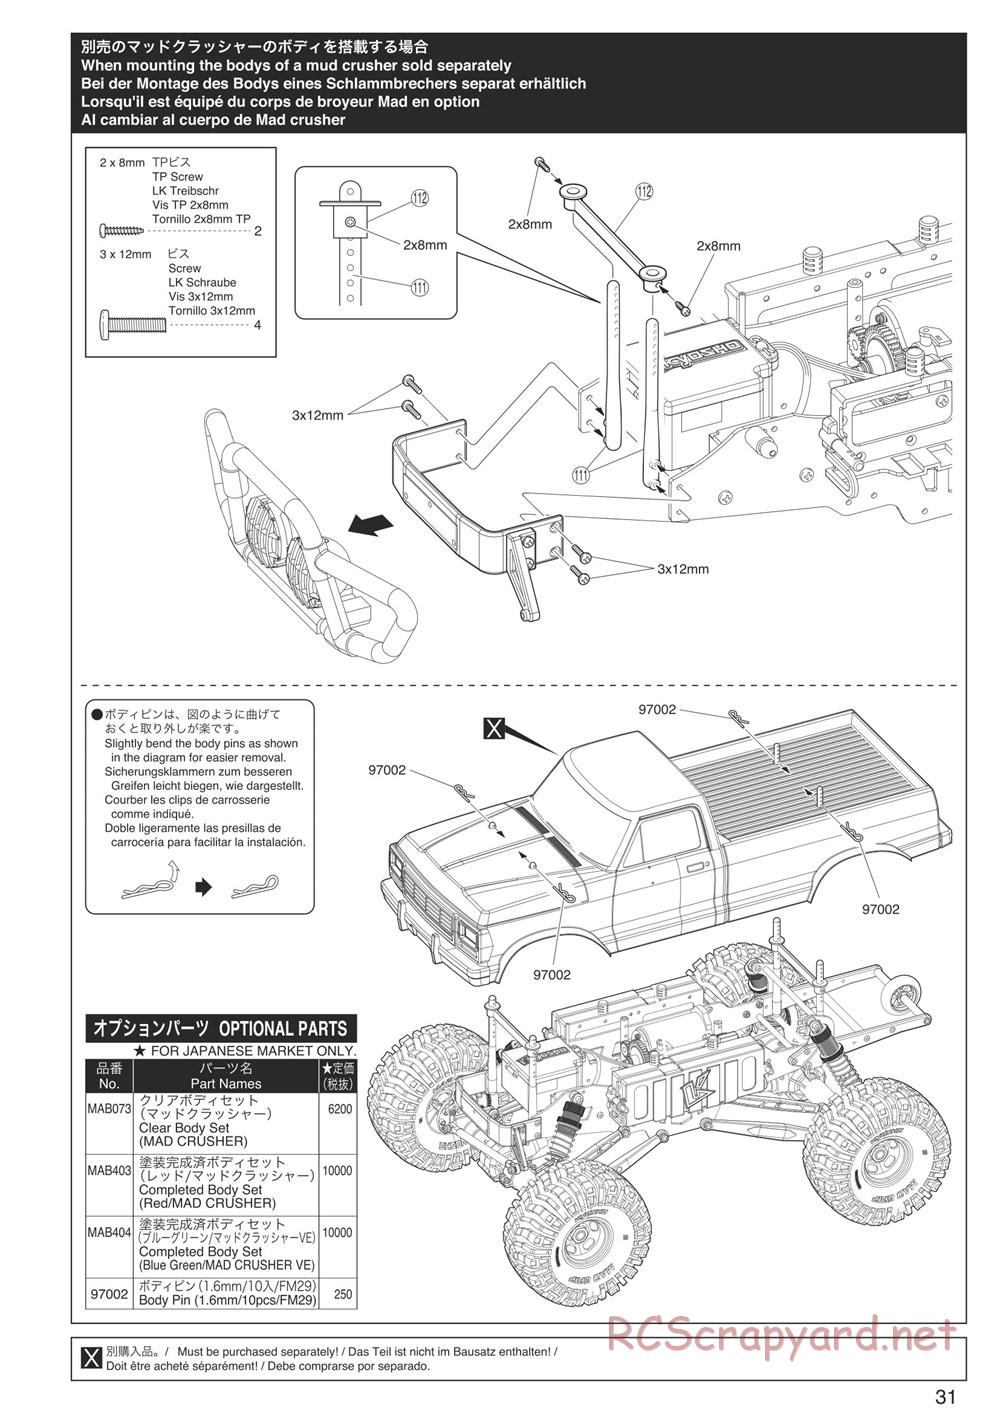 Kyosho - FO-XX VE 2.0 - Manual - Page 31